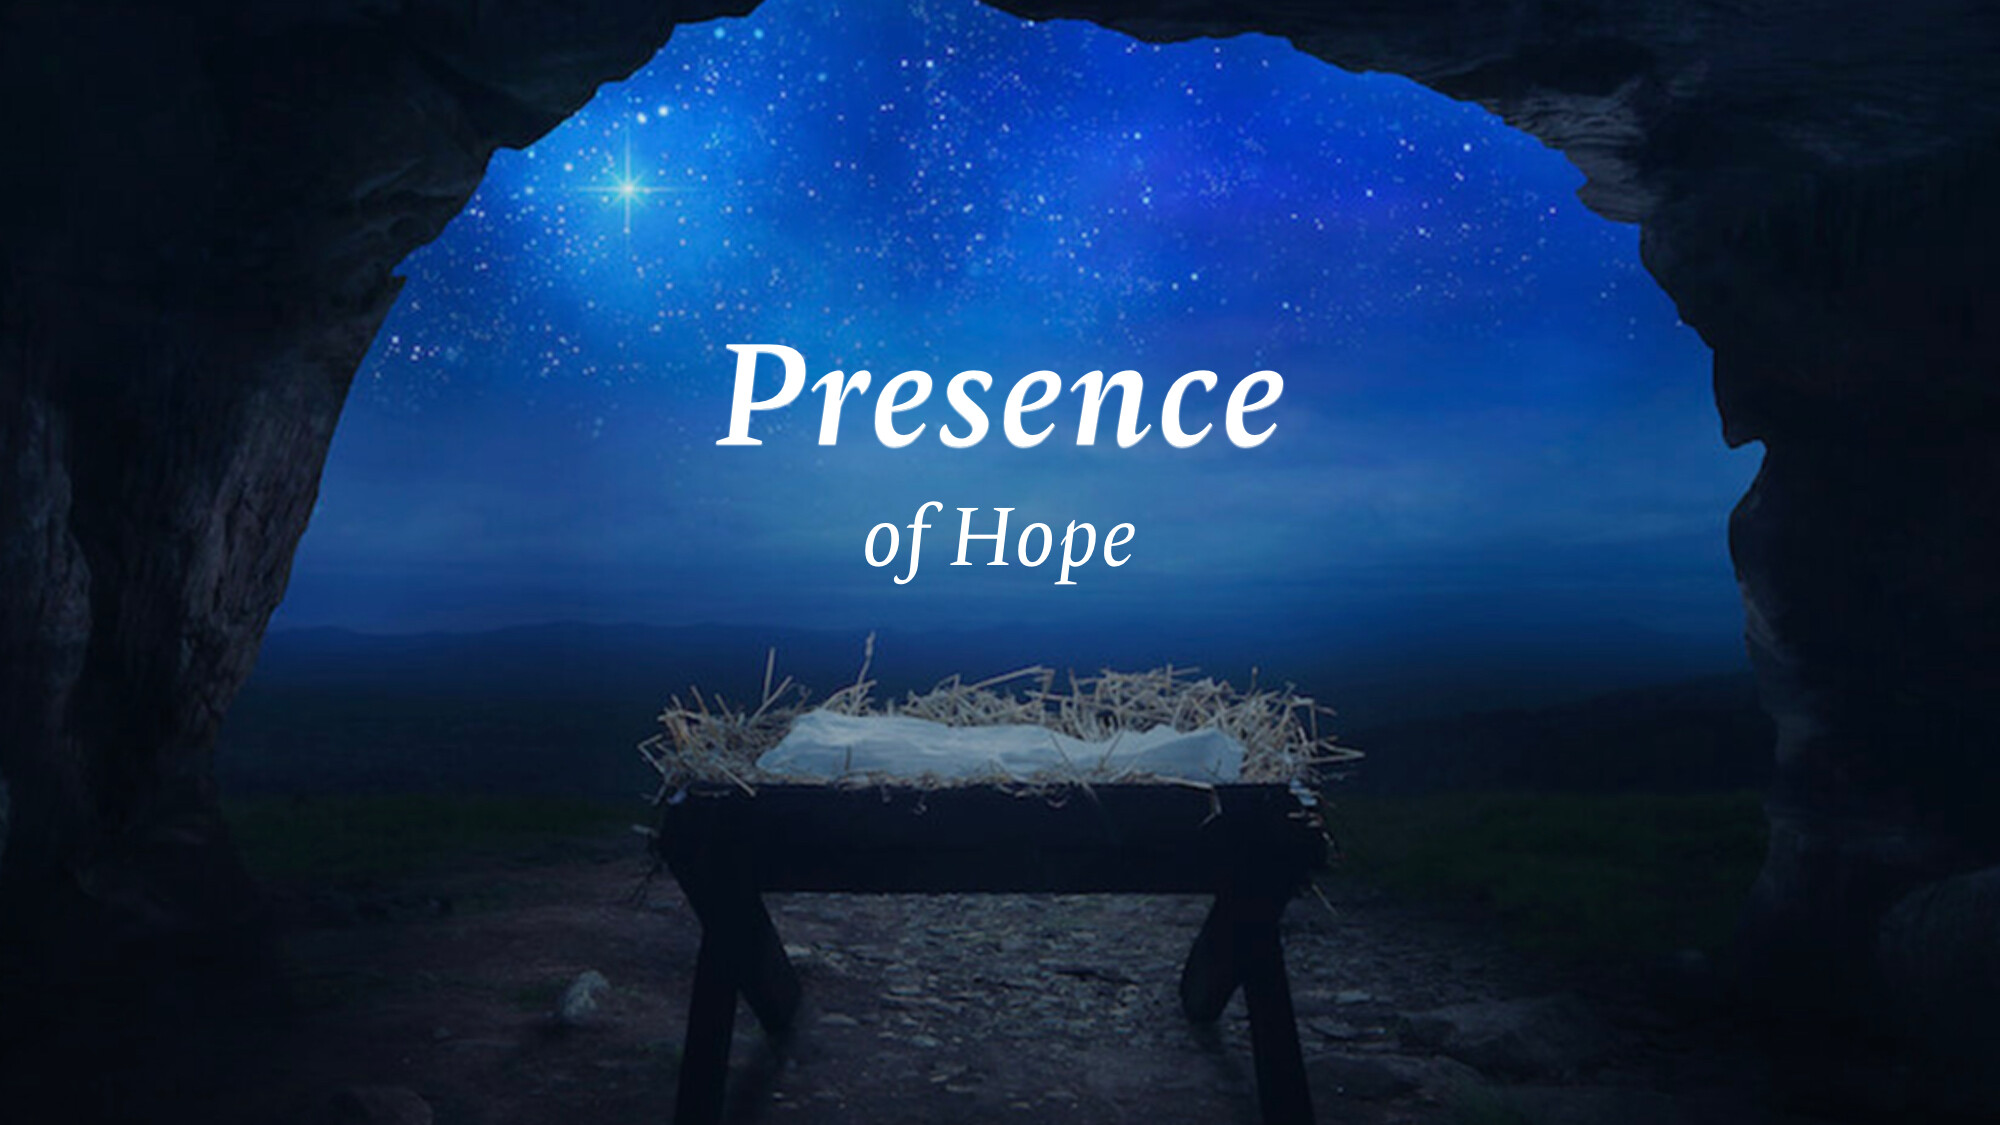 The Presence of Hope